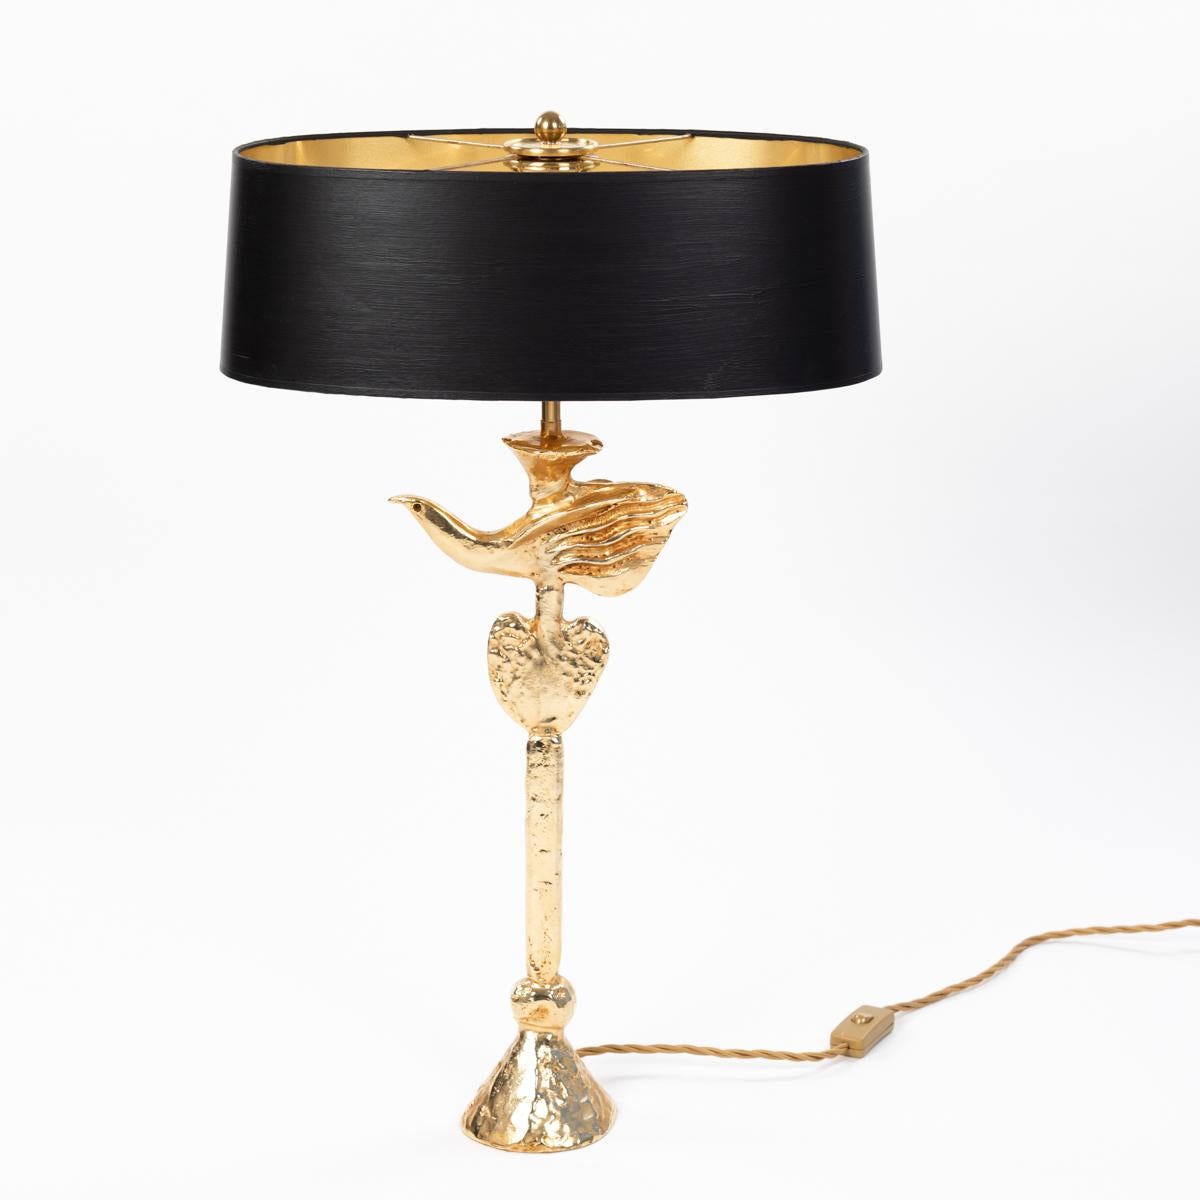 French Gilded Bronze Table Lamp by Pierre Casenove for Fondica, 1980s For Sale 2